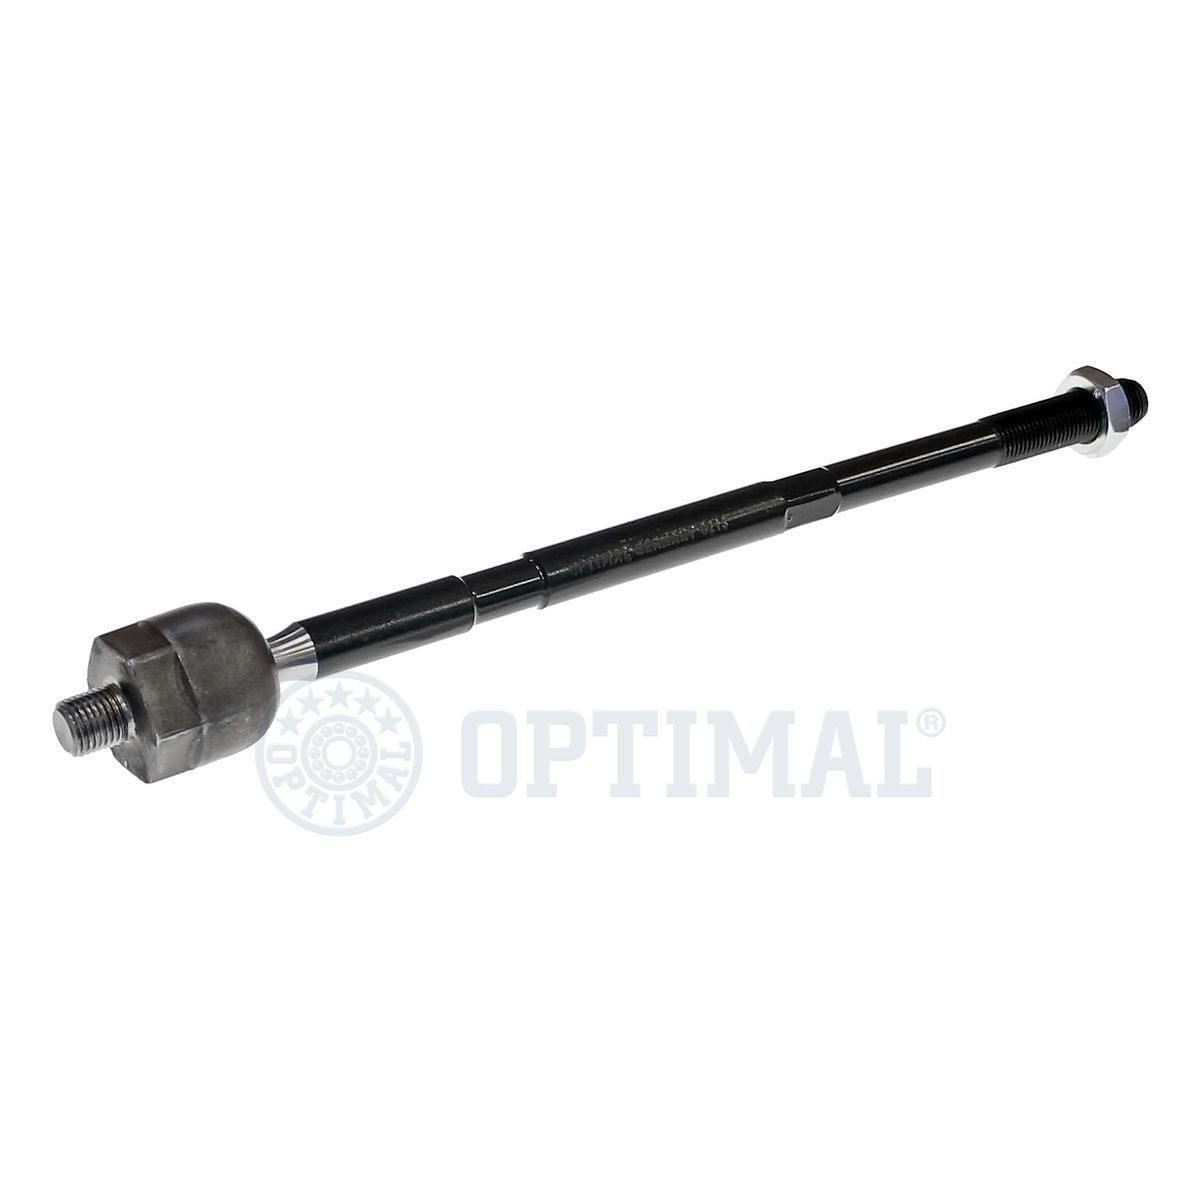 G0-530 OPTIMAL Front Axle Left, Front Axle Right, M14 x 1,50 RHT, 323 mm Length: 323mm Tie rod axle joint G2-118 buy